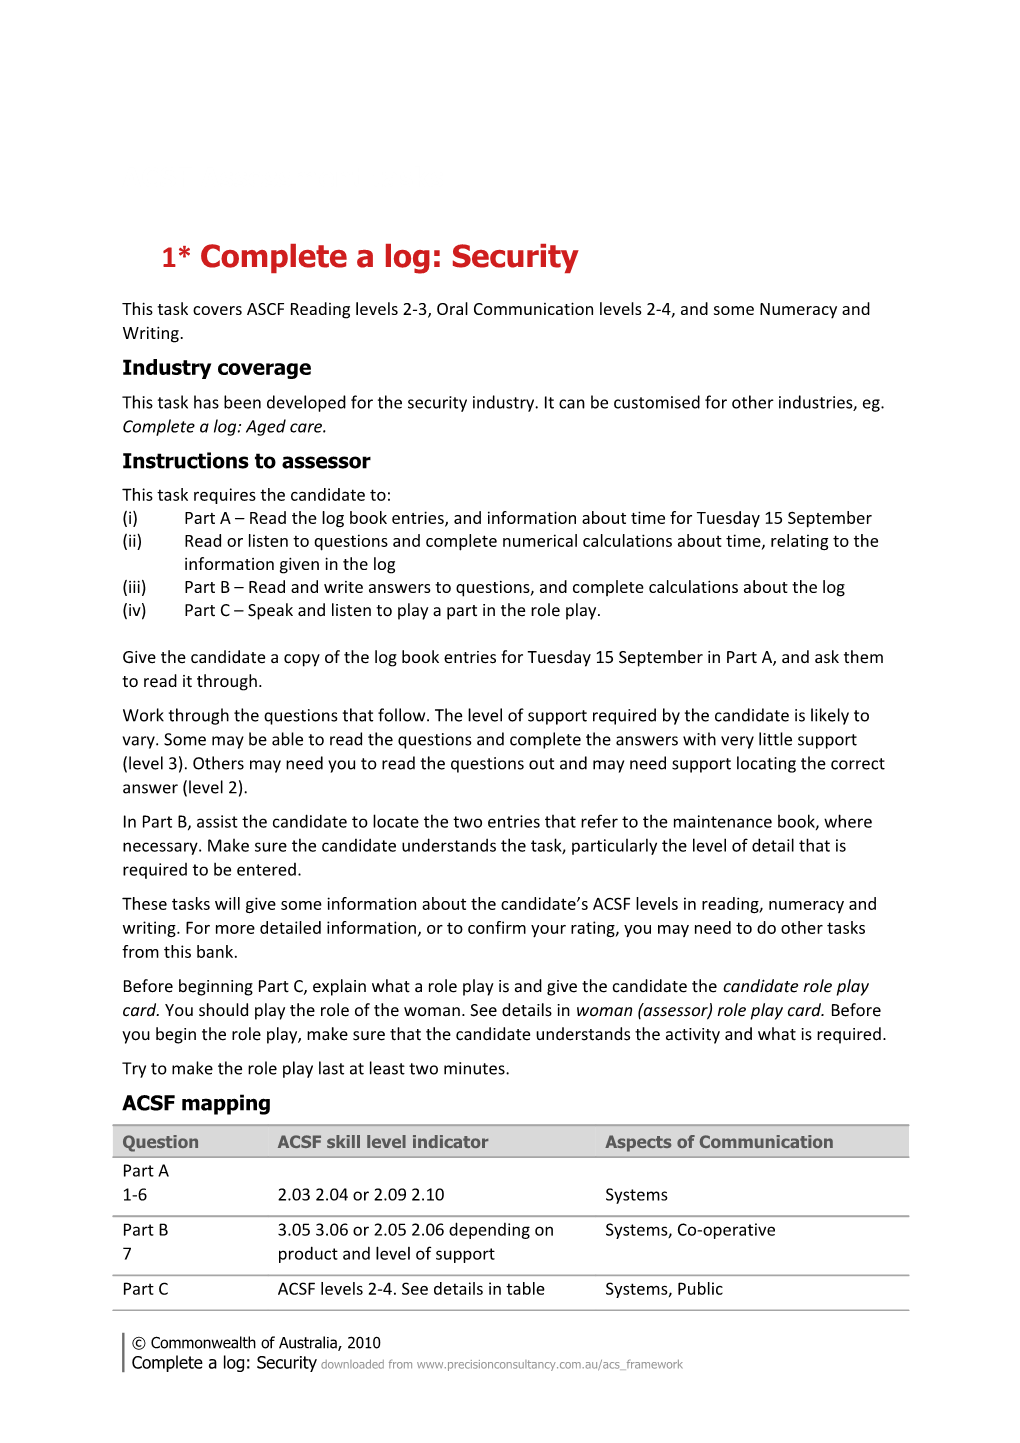 Complete a Log: Security